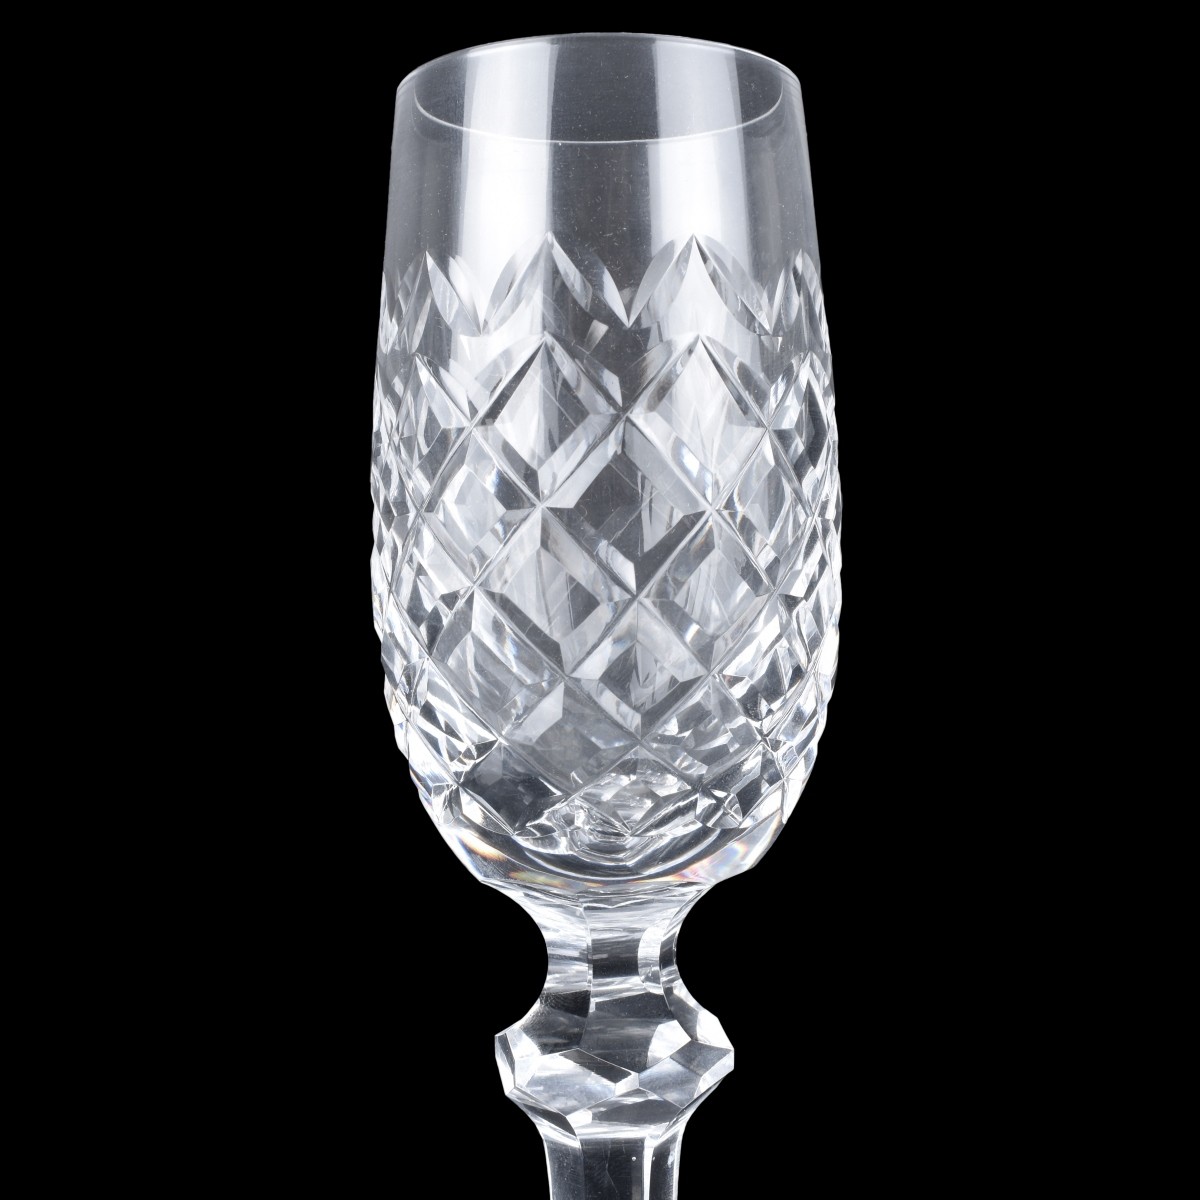 Waterford "Powerscourt" Fluted Champagne Glasses